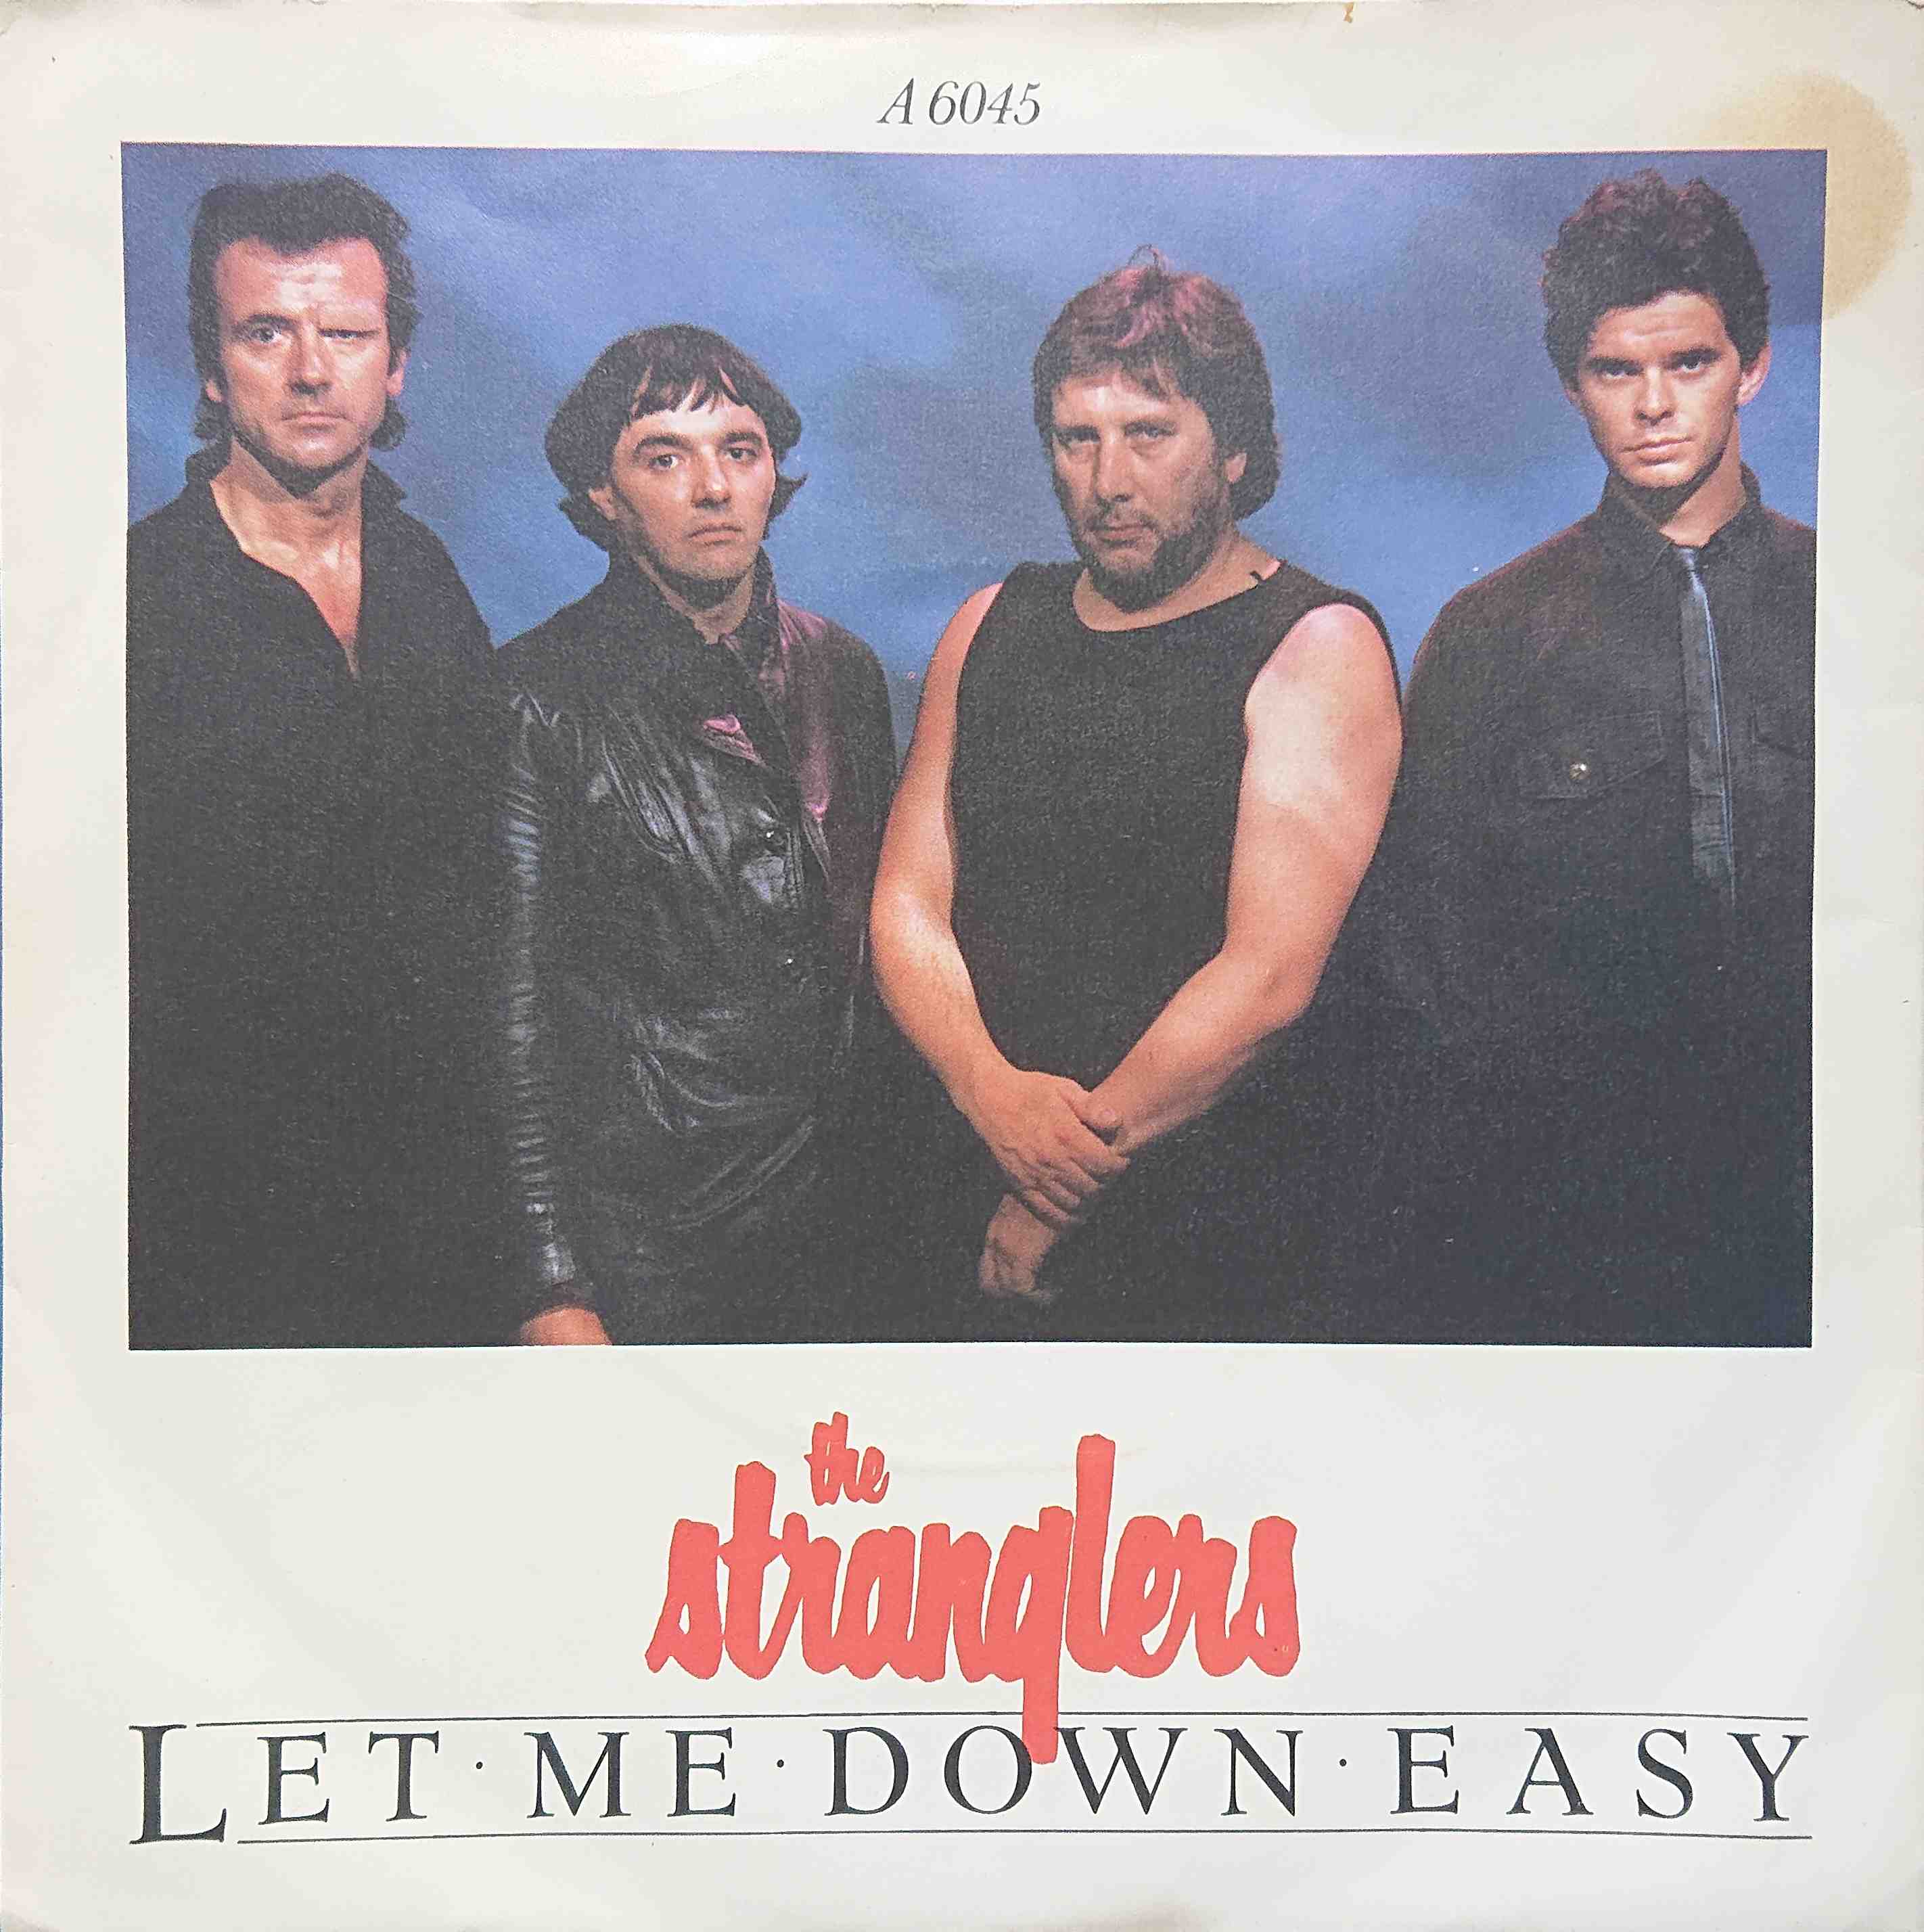 Picture of Let me down easy by artist The Stranglers from The Stranglers singles